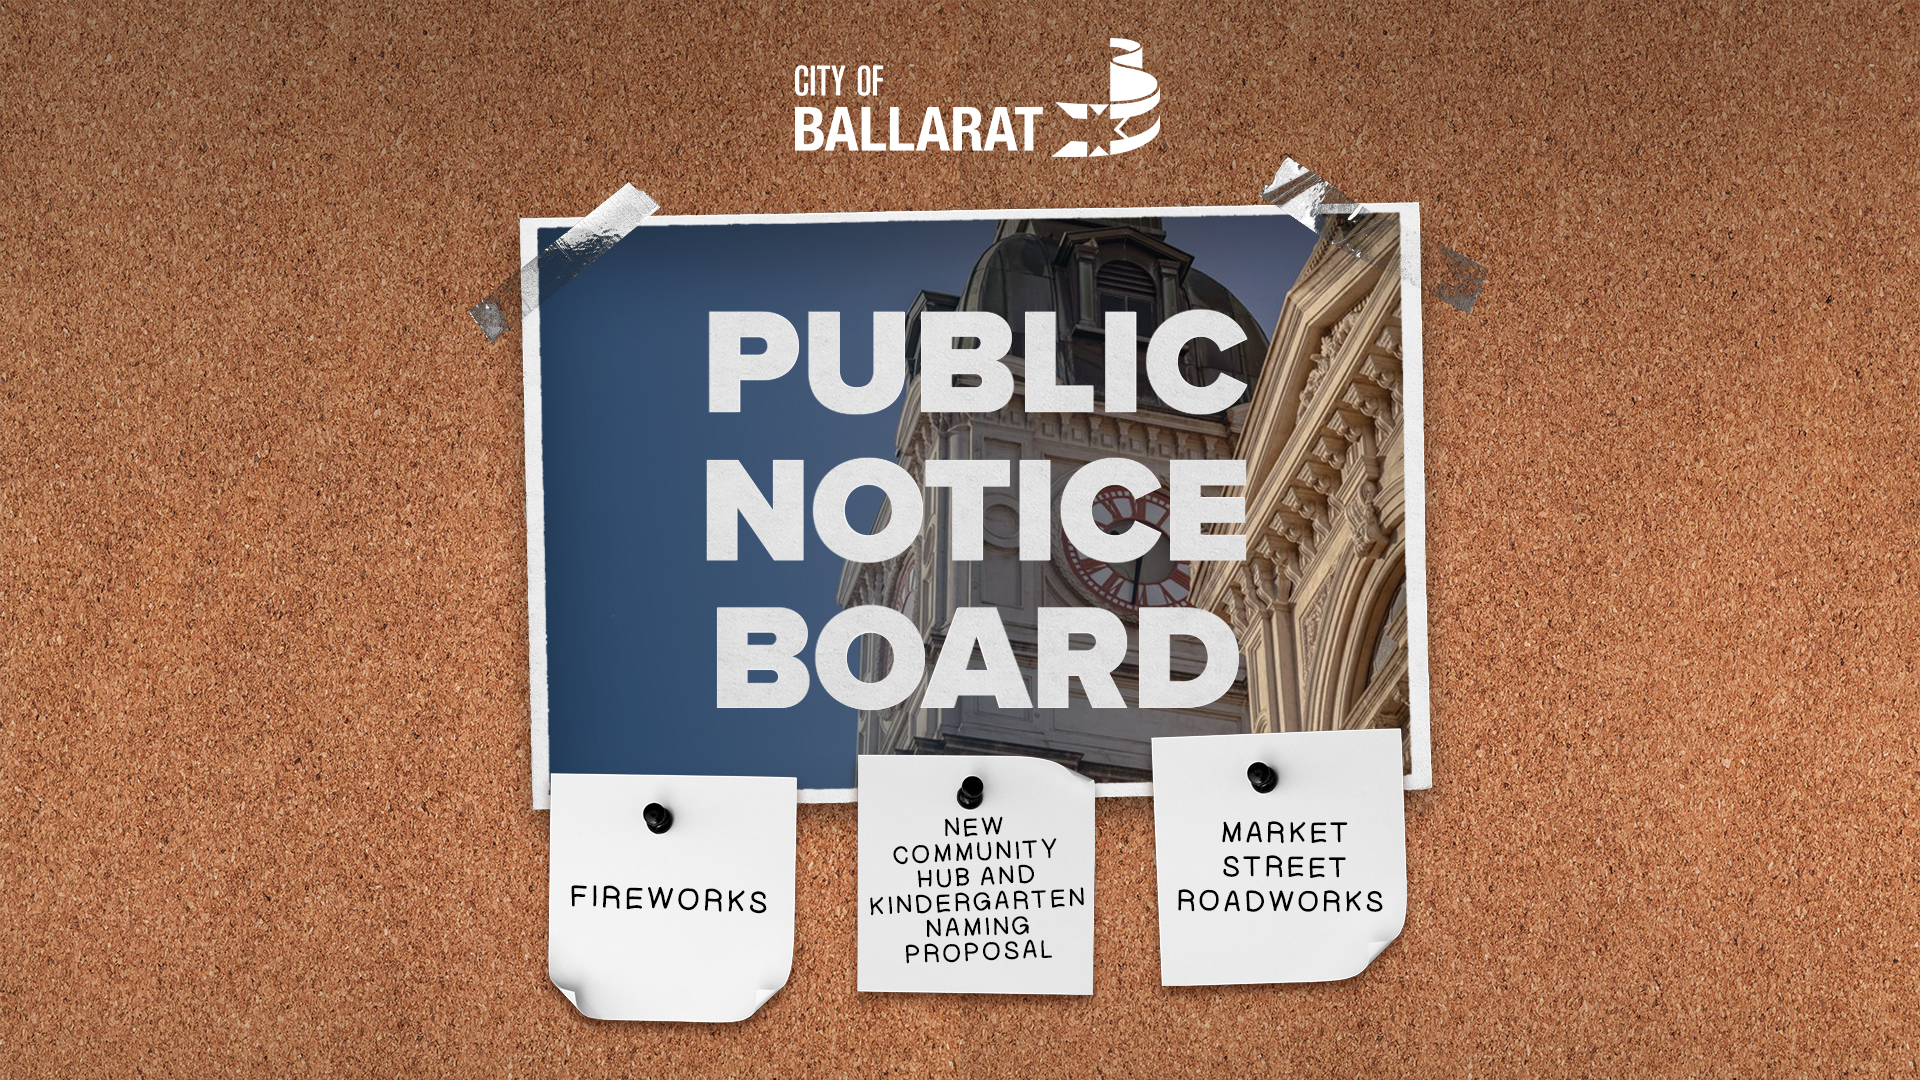 Notice board with Public Notice Board text over an image of Ballarat Town Hall. Three notes underneath with text saying fireworks, new community hub and kindergarten naming proposal, Market Street roadworks